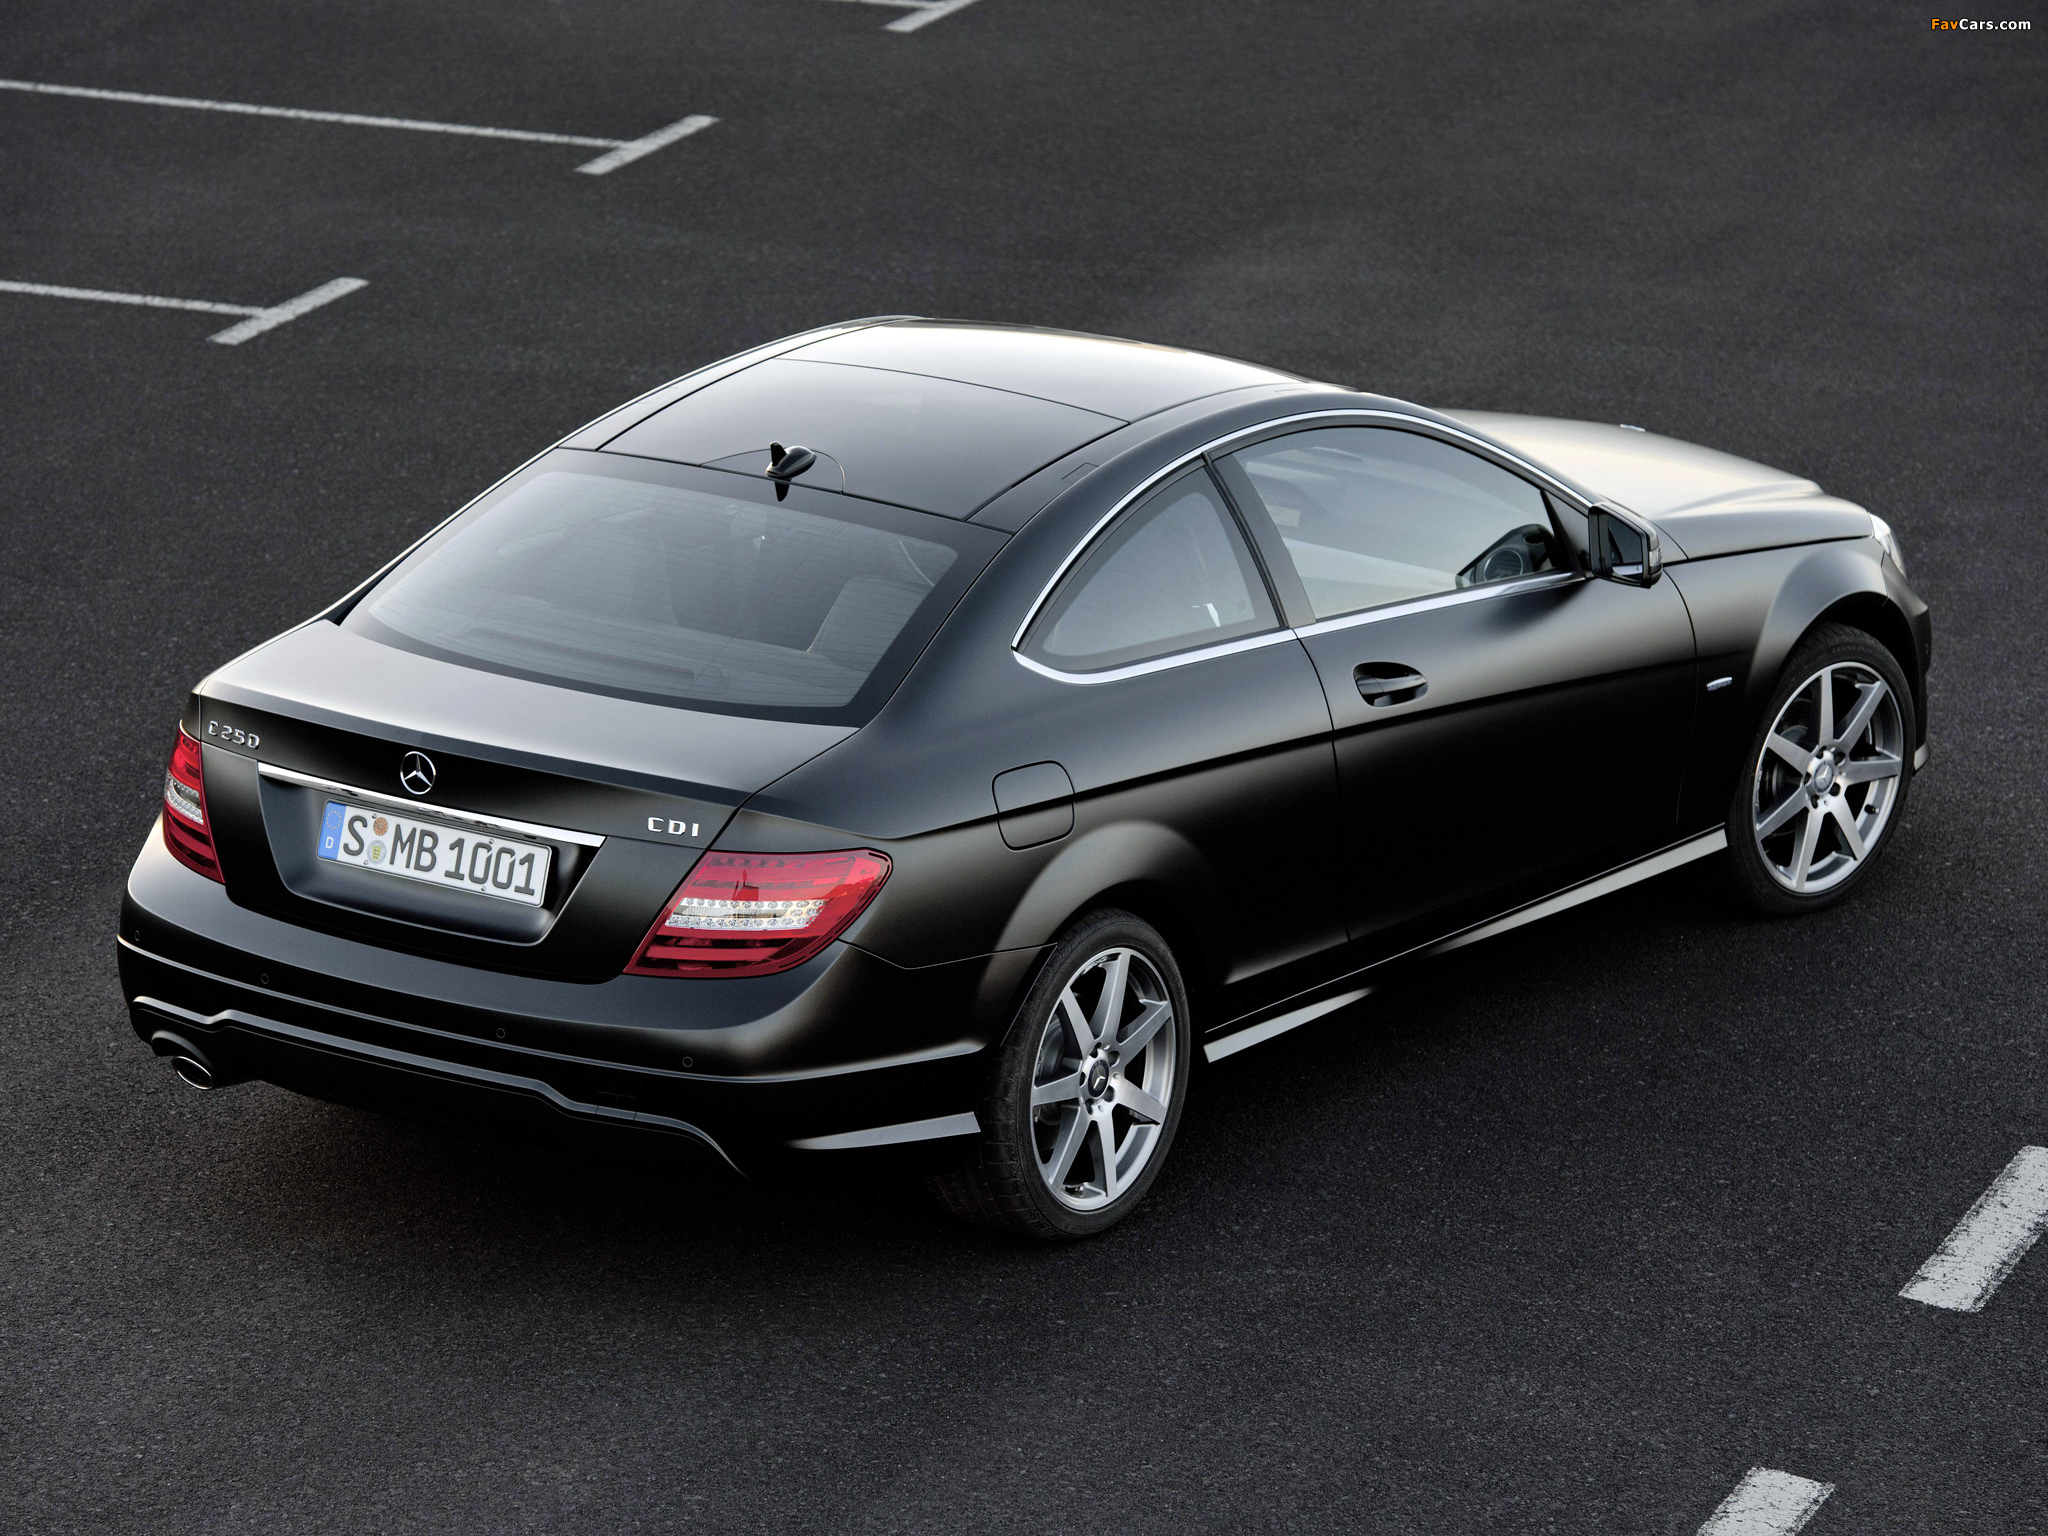 Mercedes-Benz C 250 CDI Coupe (C204) 2011 wallpapers (2048 x 1536)